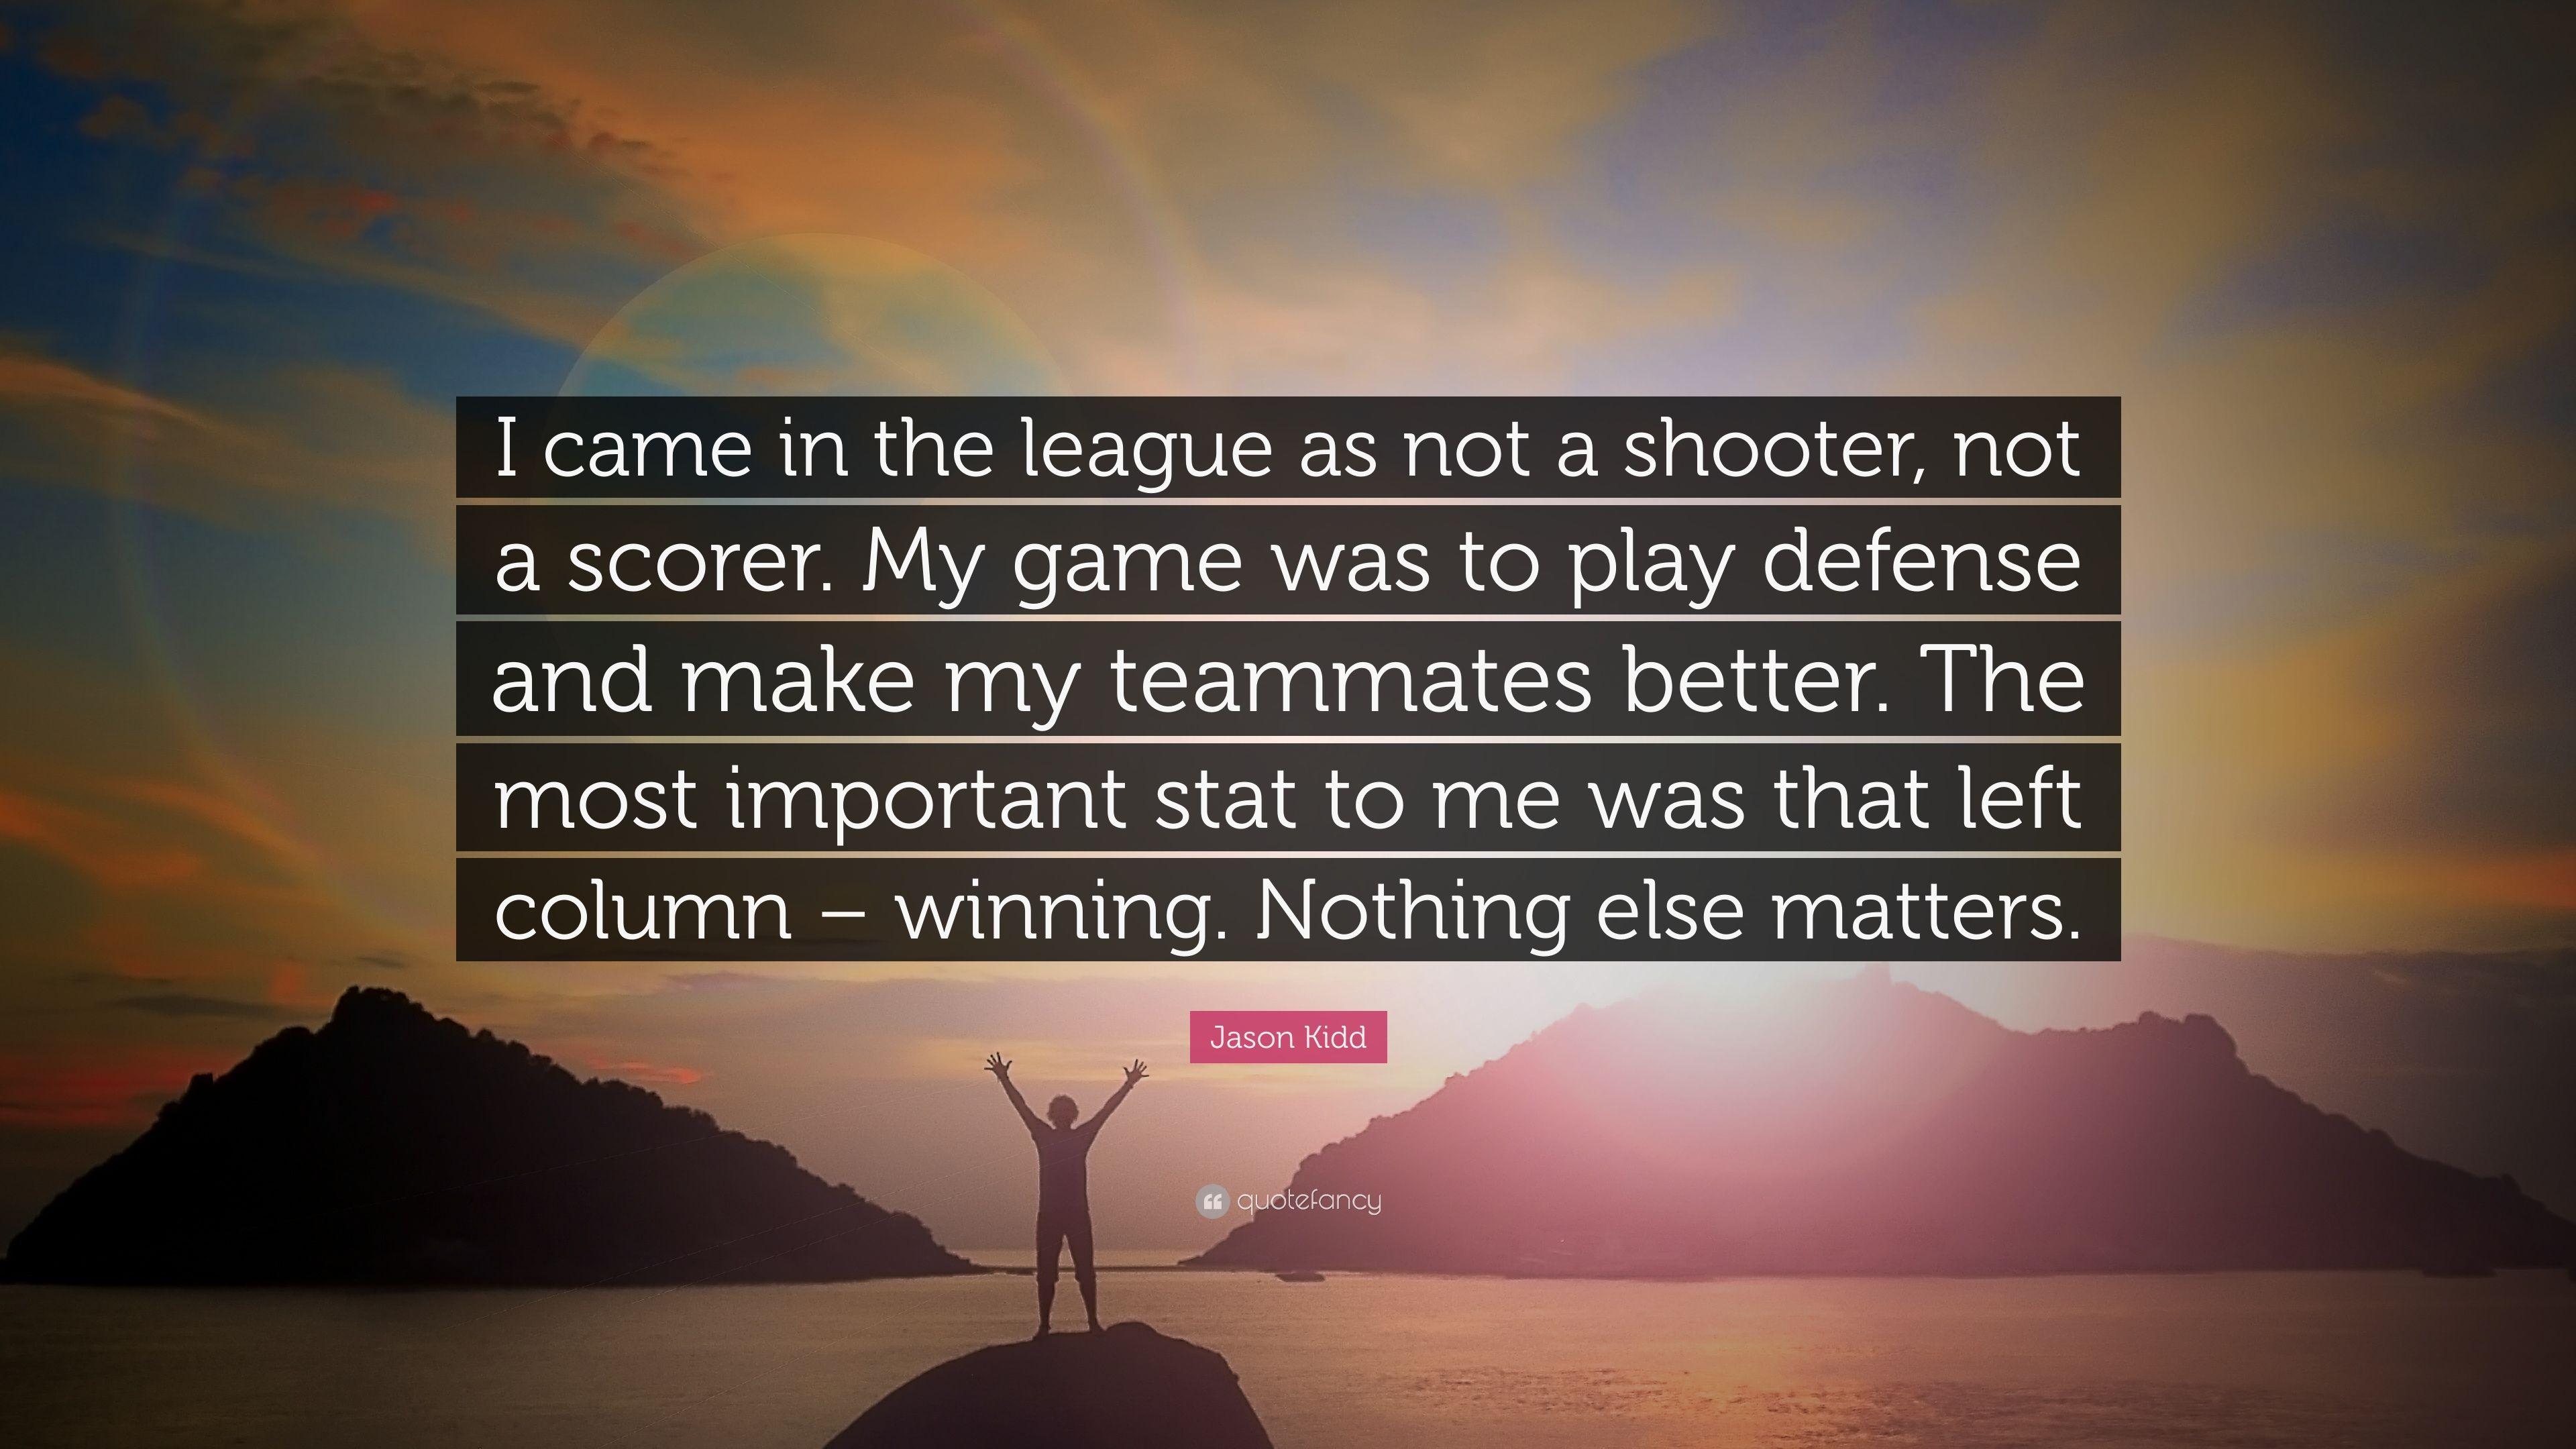 Jason Kidd Quote: “I came in the league as not a shooter, not a